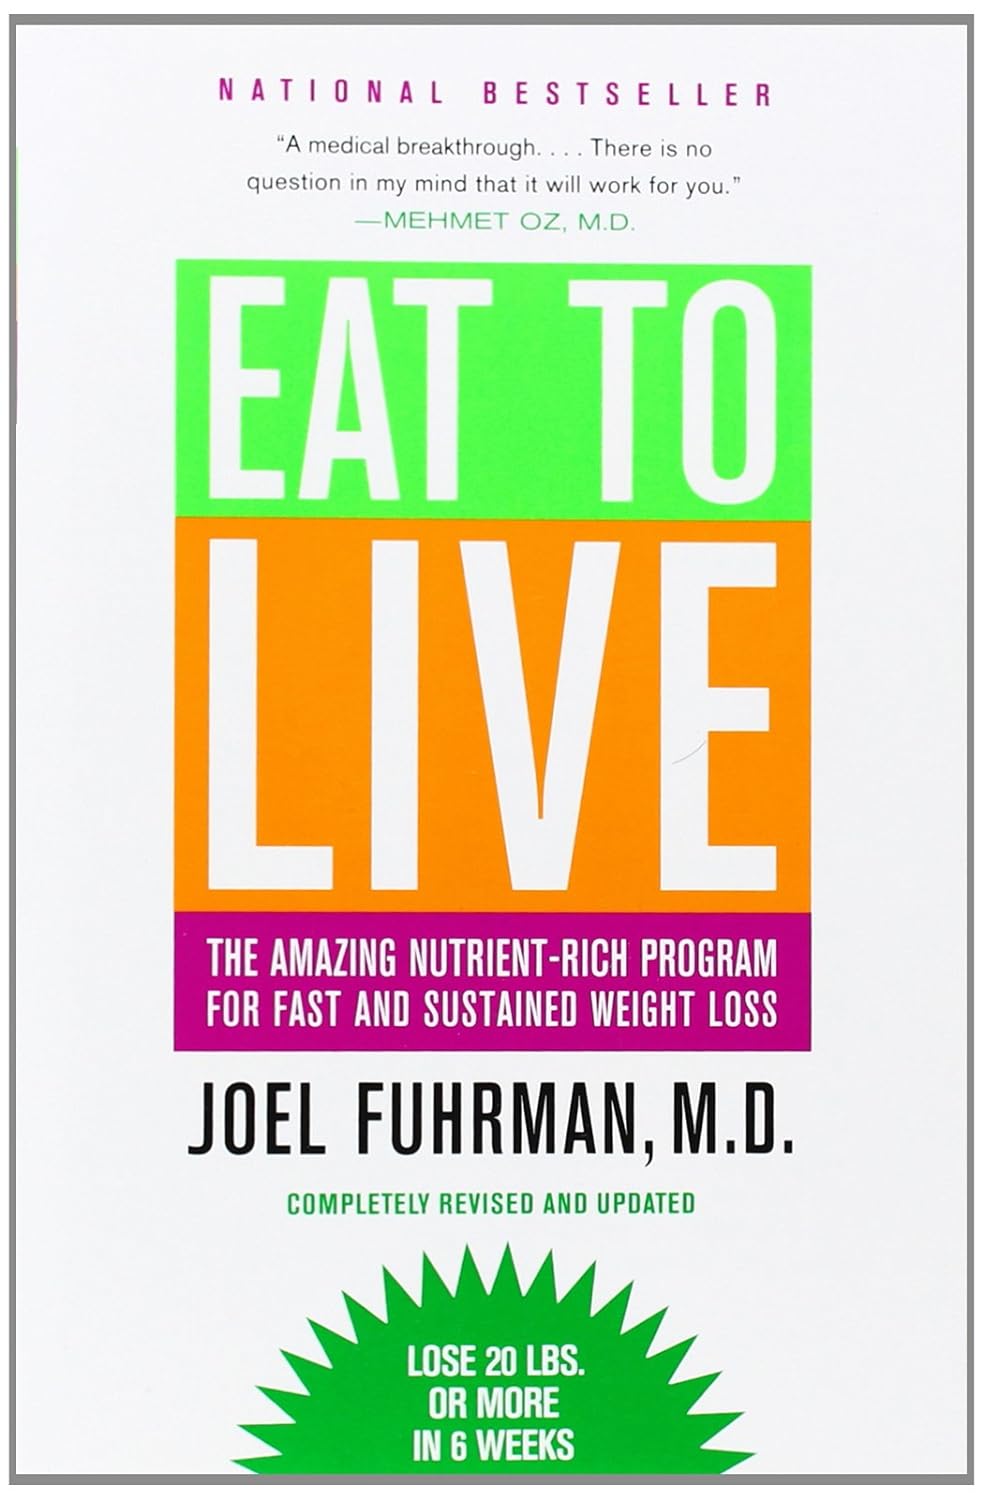 Eat to Live: The Amazing Nutrient-Rich Program for Fast and Sustained Weight Loss, Revised Edition Paperback – January 5, 2011